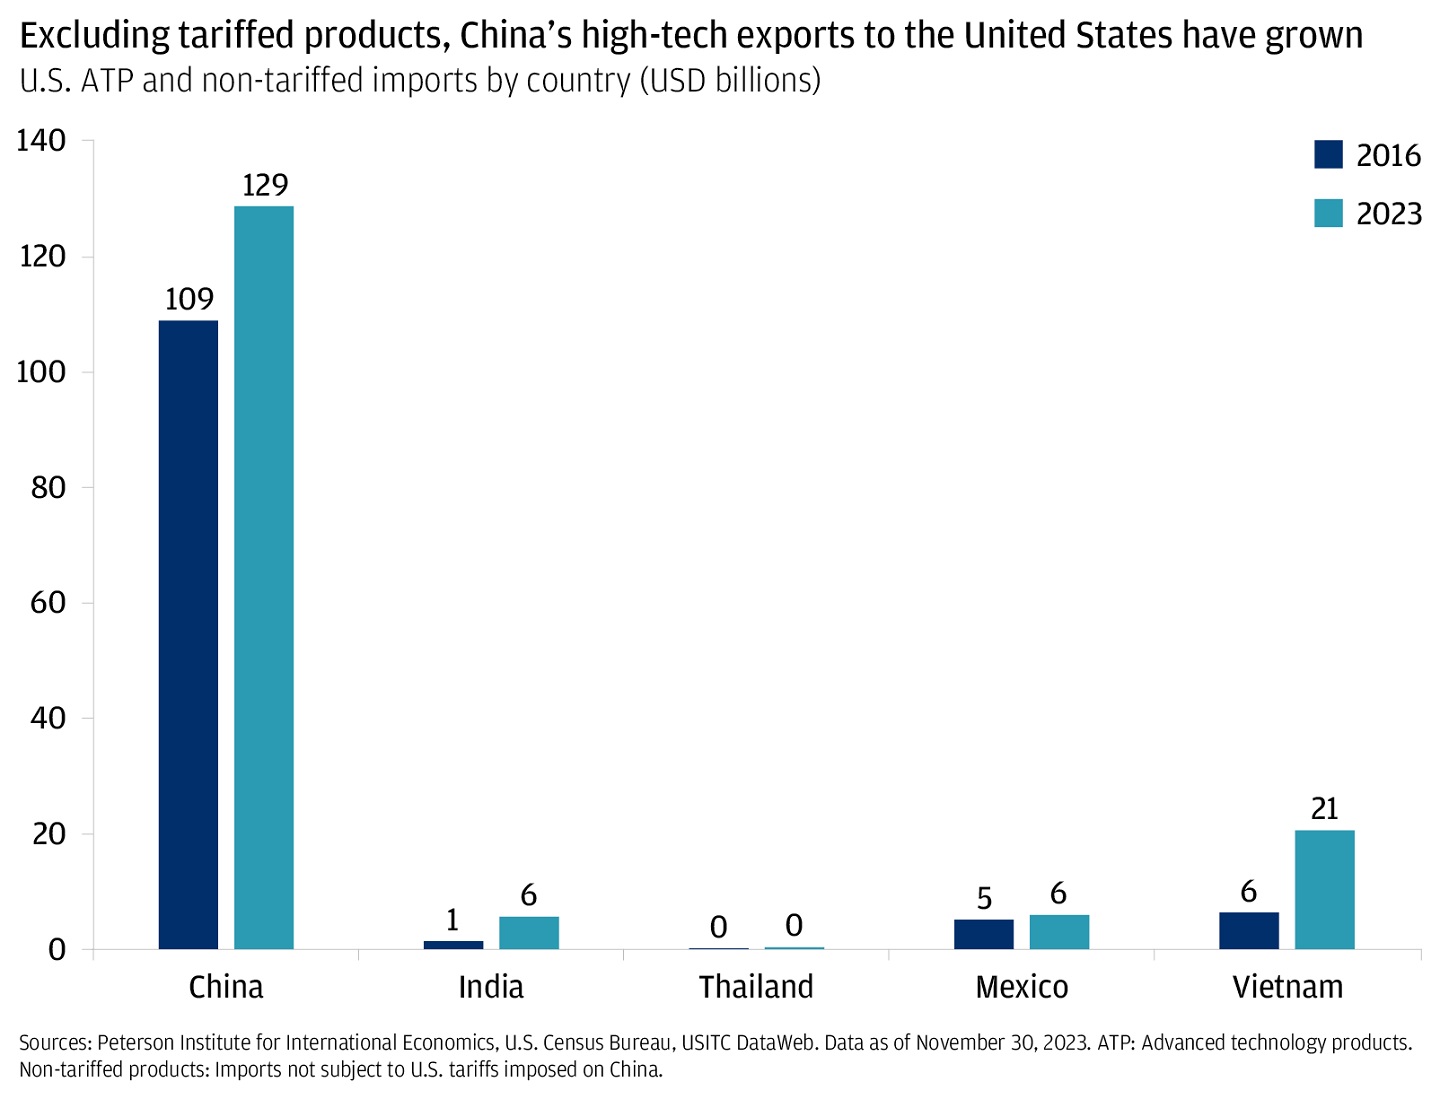 The bar graph describes the U.S. non-tariffed Advanced Technology Products imports by country in USD billion.